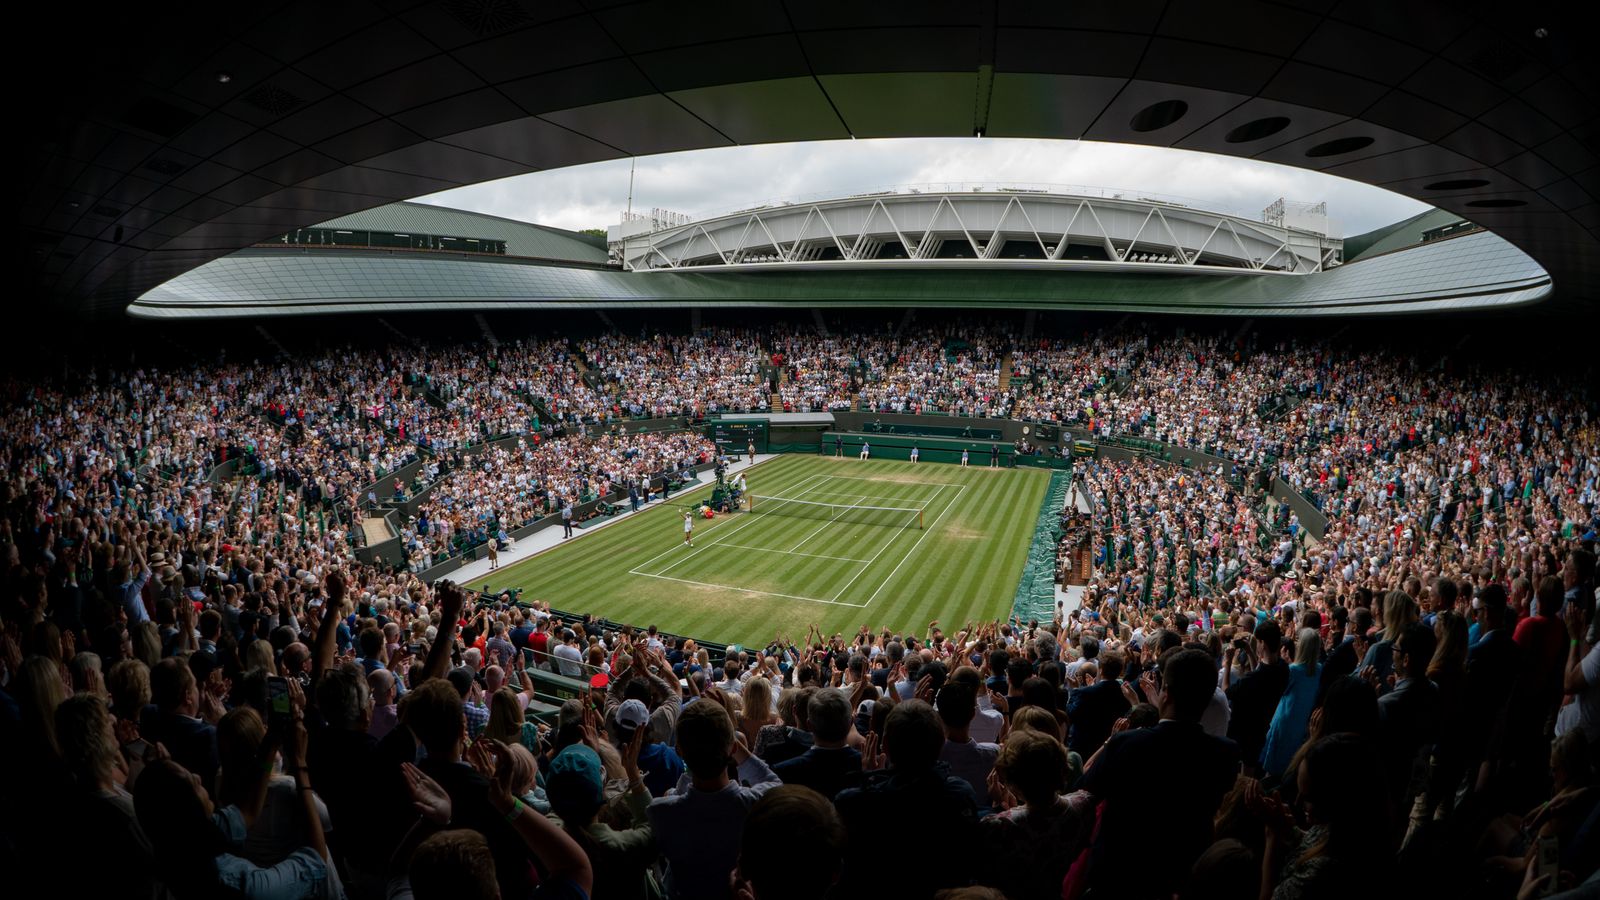 Wimbledon to host full capacity crowds for final rounds in Centre Court and Court One | UK News | Sky News